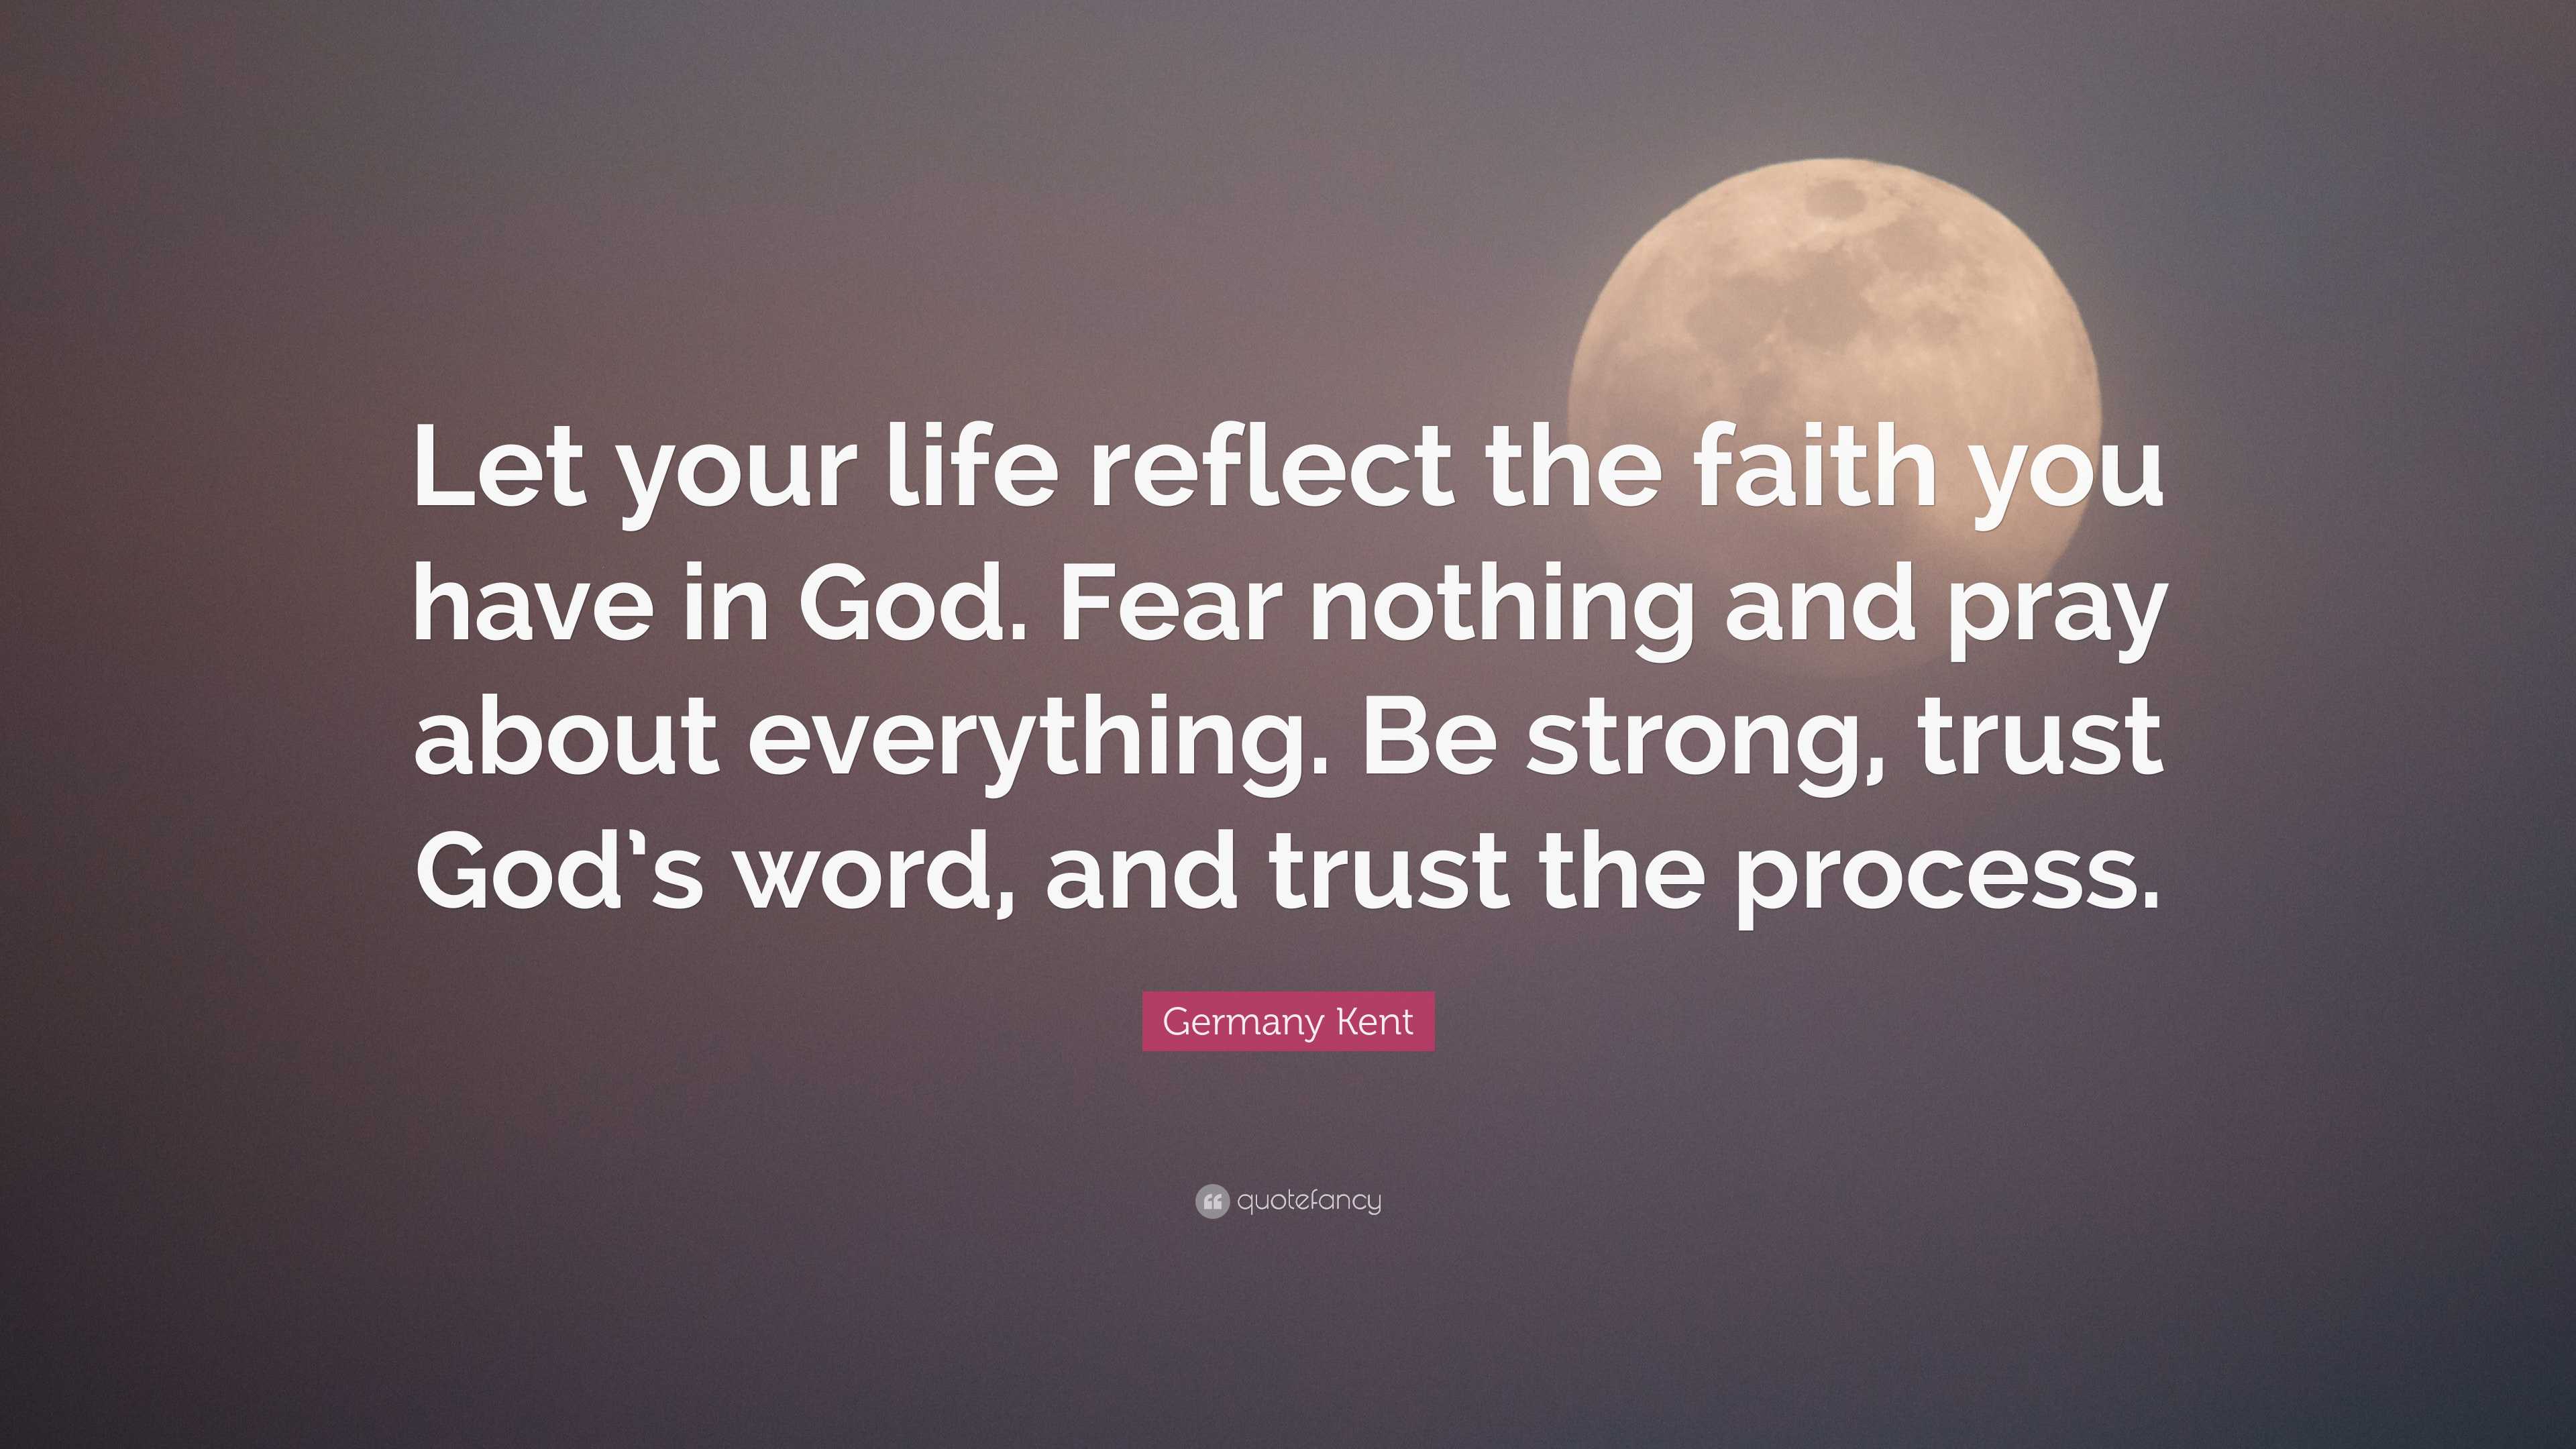 Germany Kent Quote: “Let your life reflect the faith you have in God ...